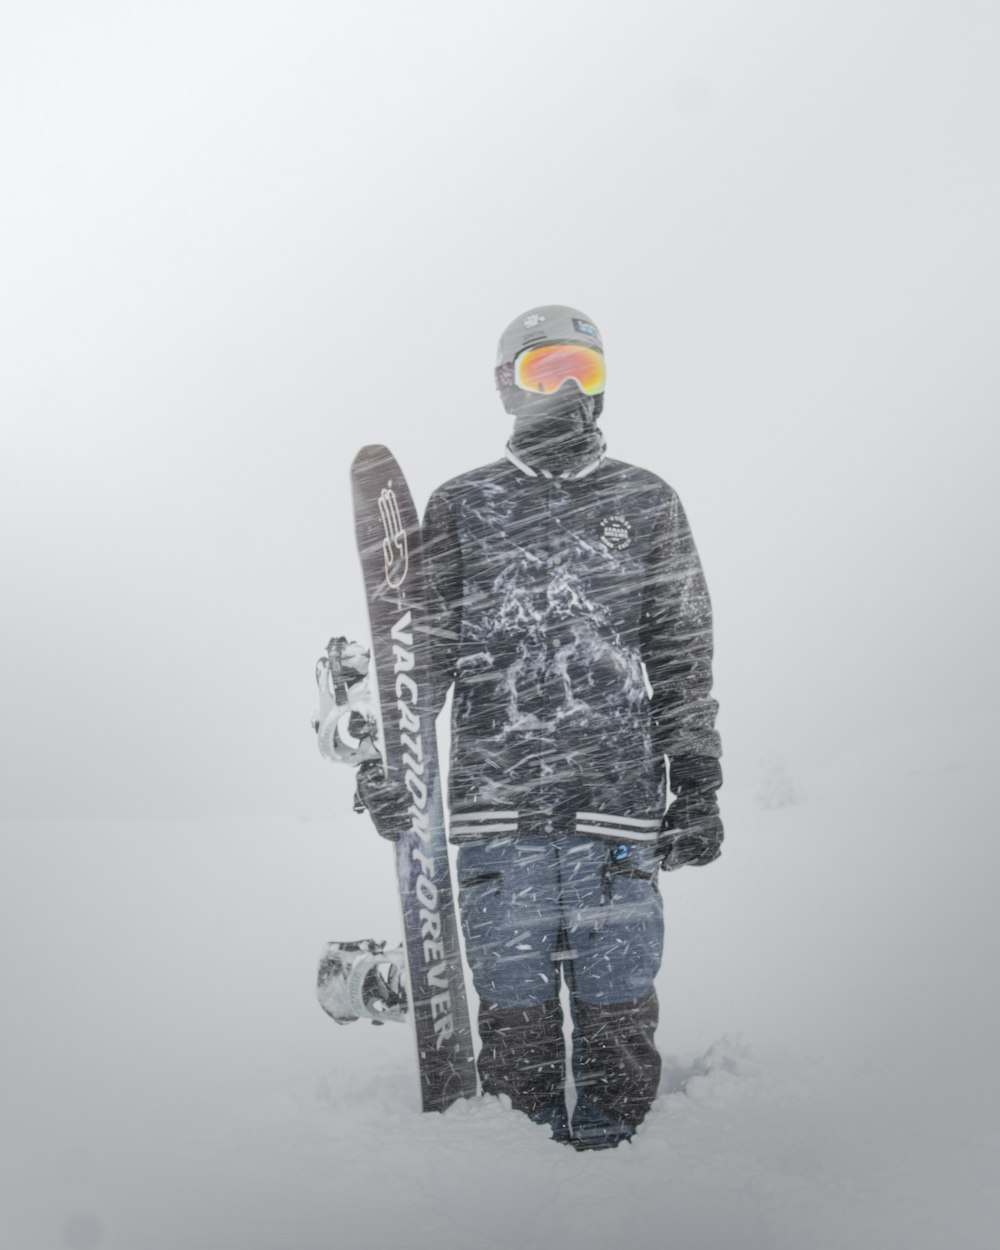 man in black and gray jacket and blue pants holding white and red snowboard